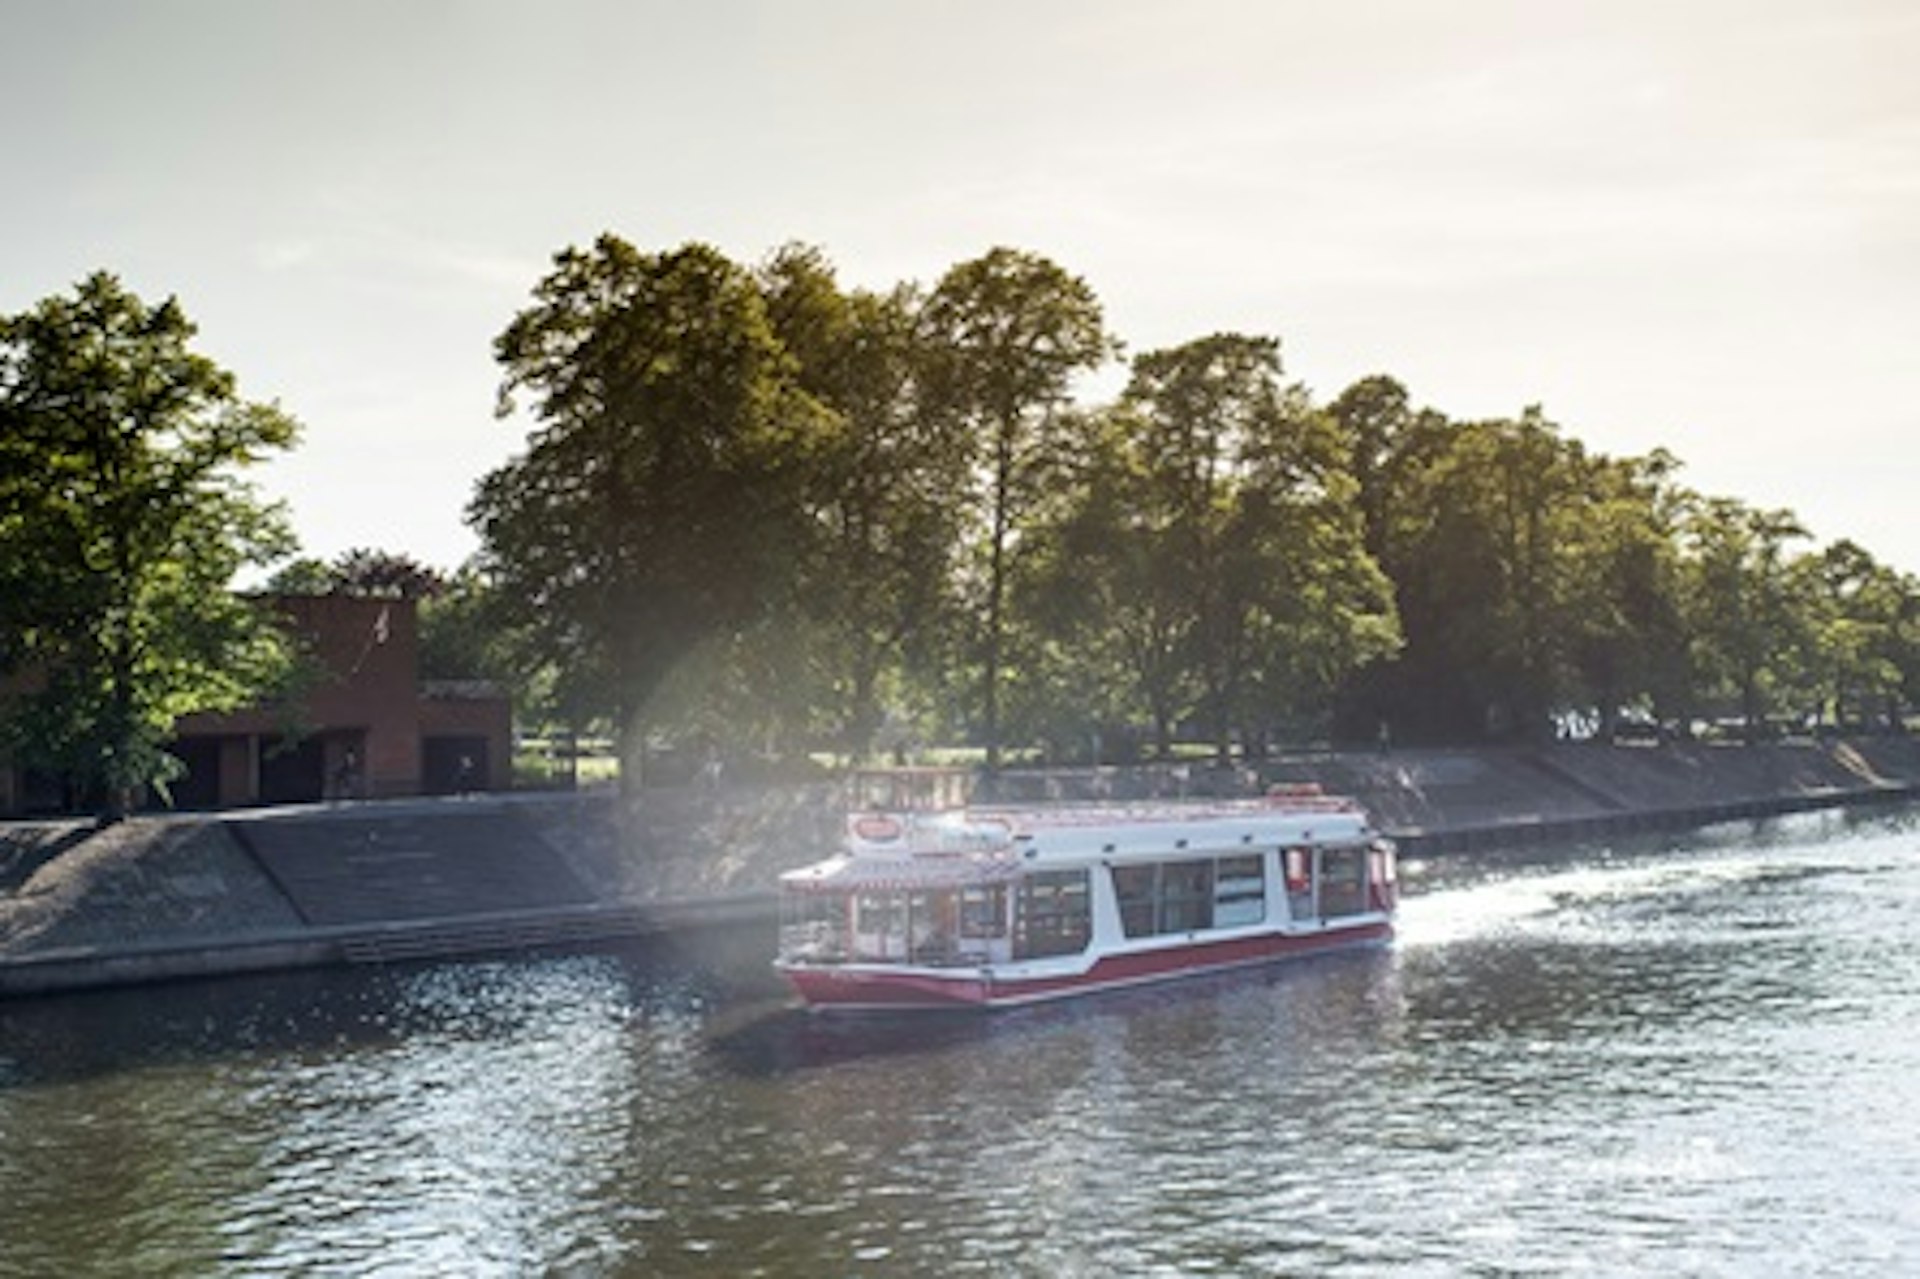 York Sightseeing River Cruise For Two 3